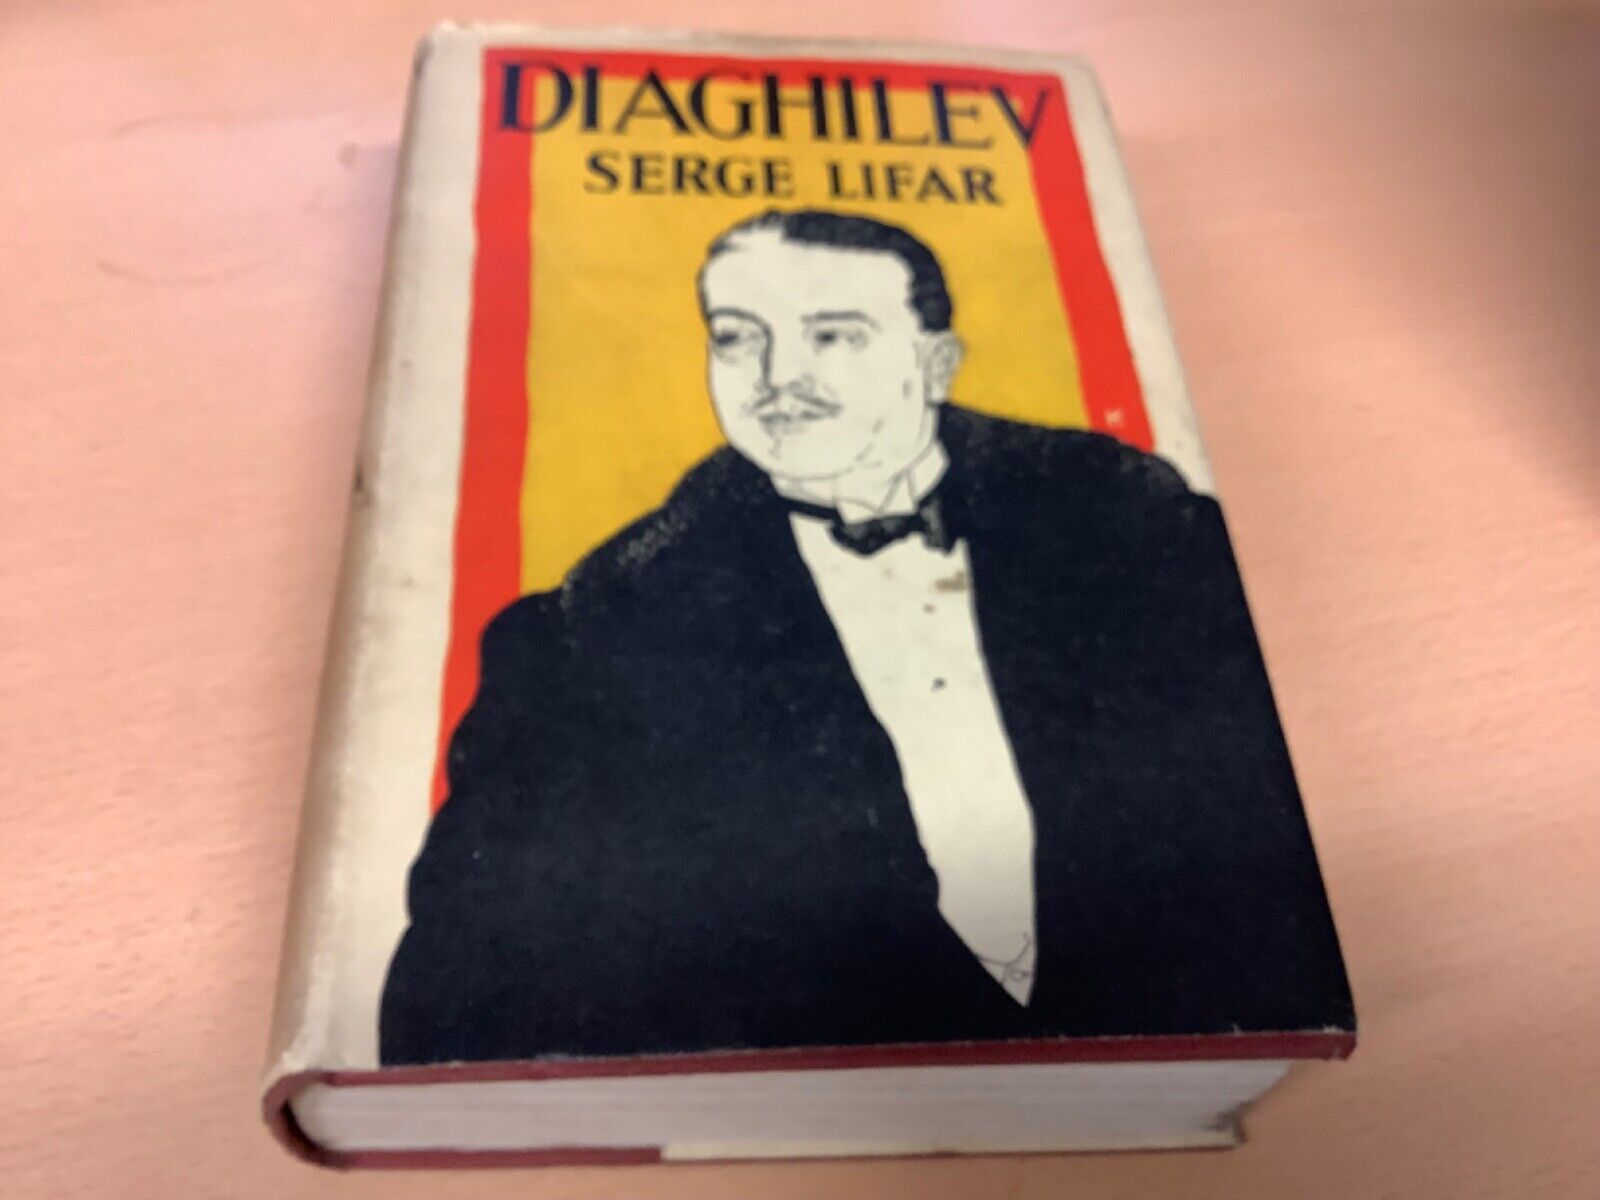 DIAGHILEV by SERGE LIFAR CYRIL signed by occupants of 37 Eaton Place 1945 Ballet